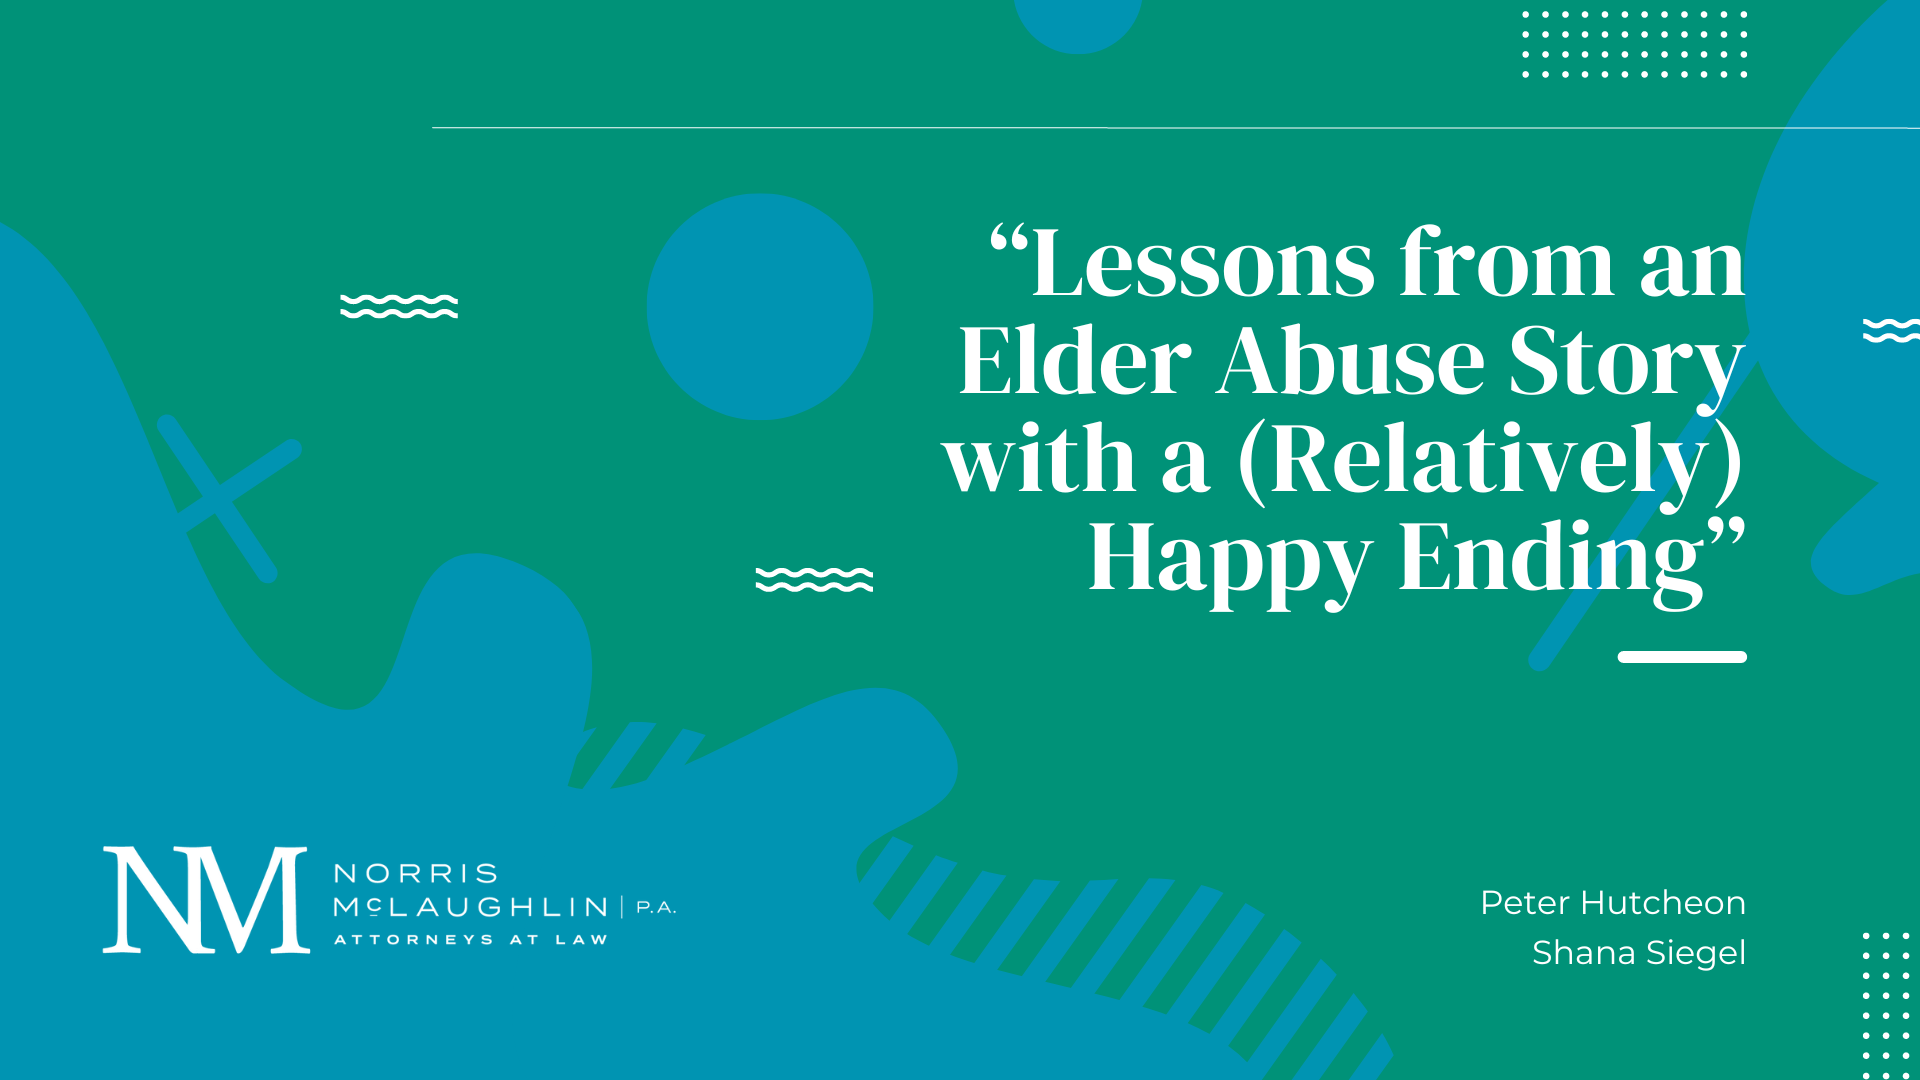 Lessons from an Elder Abuse Story with a (Relatively) Happy Ending